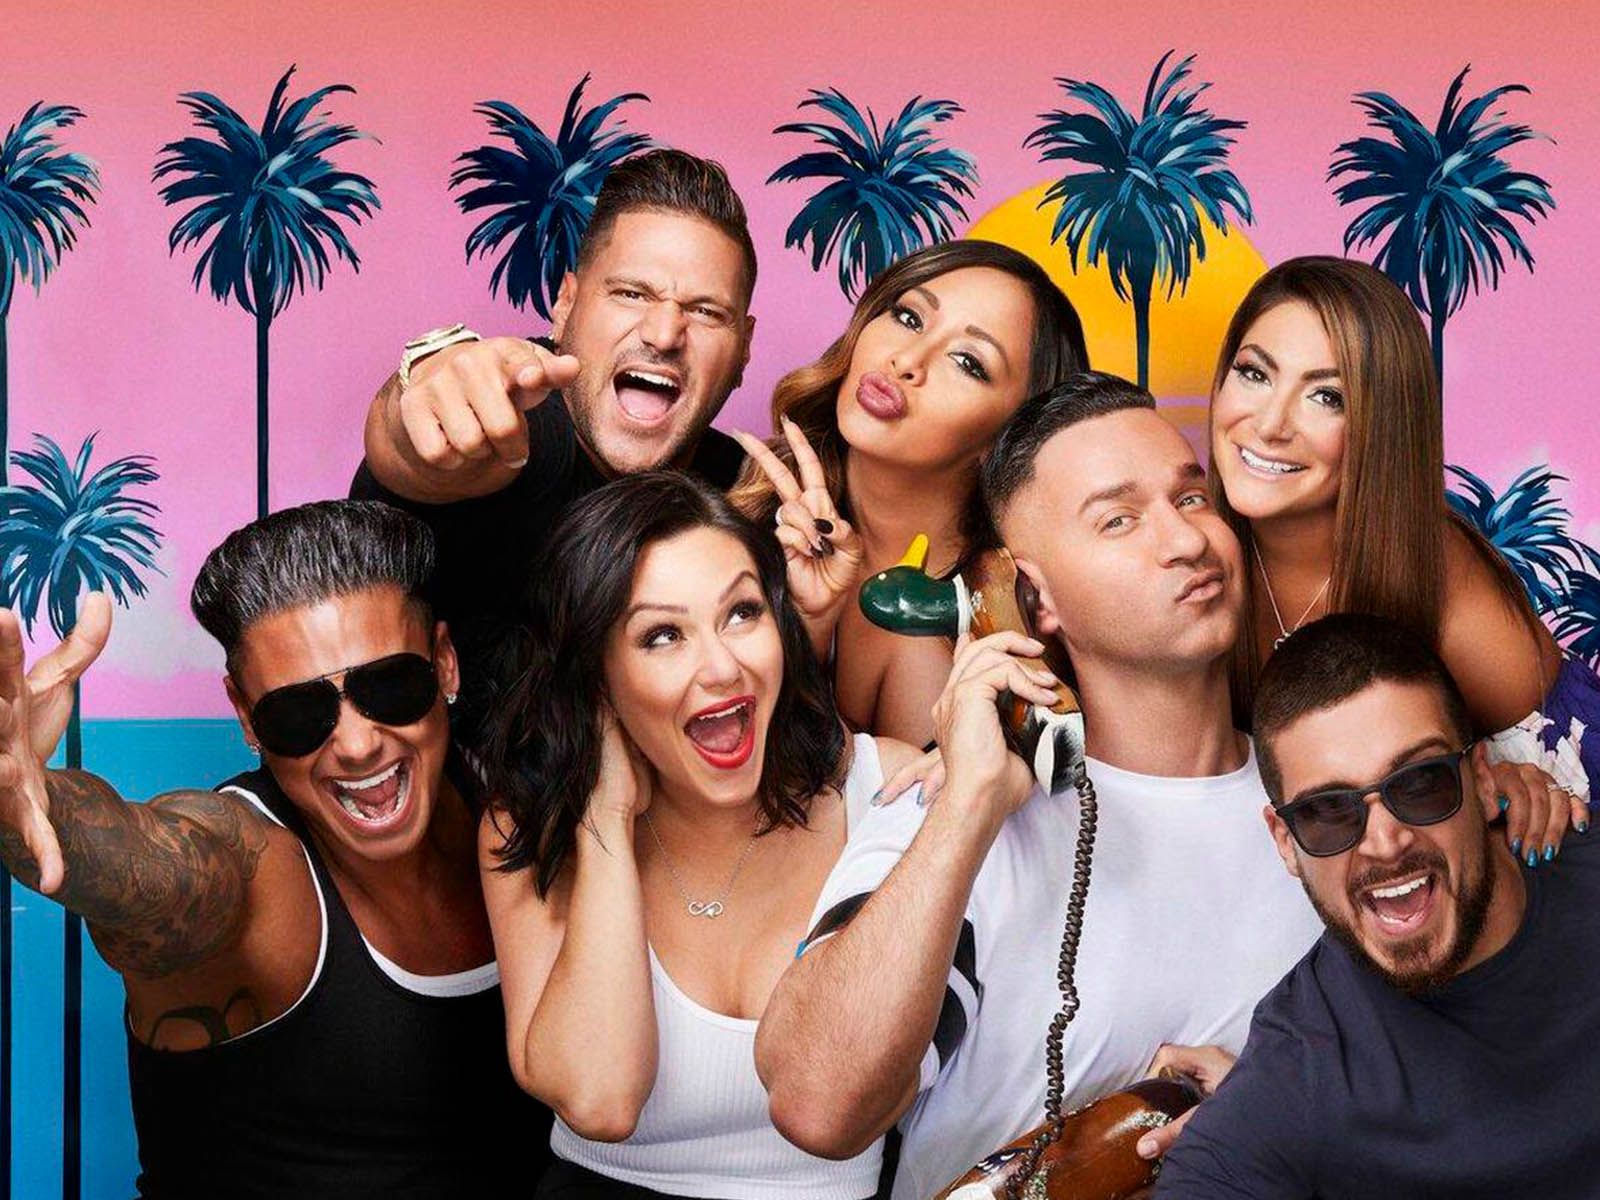 Jersey Shore is coming back to MTV and the original cast doesn’t want it to